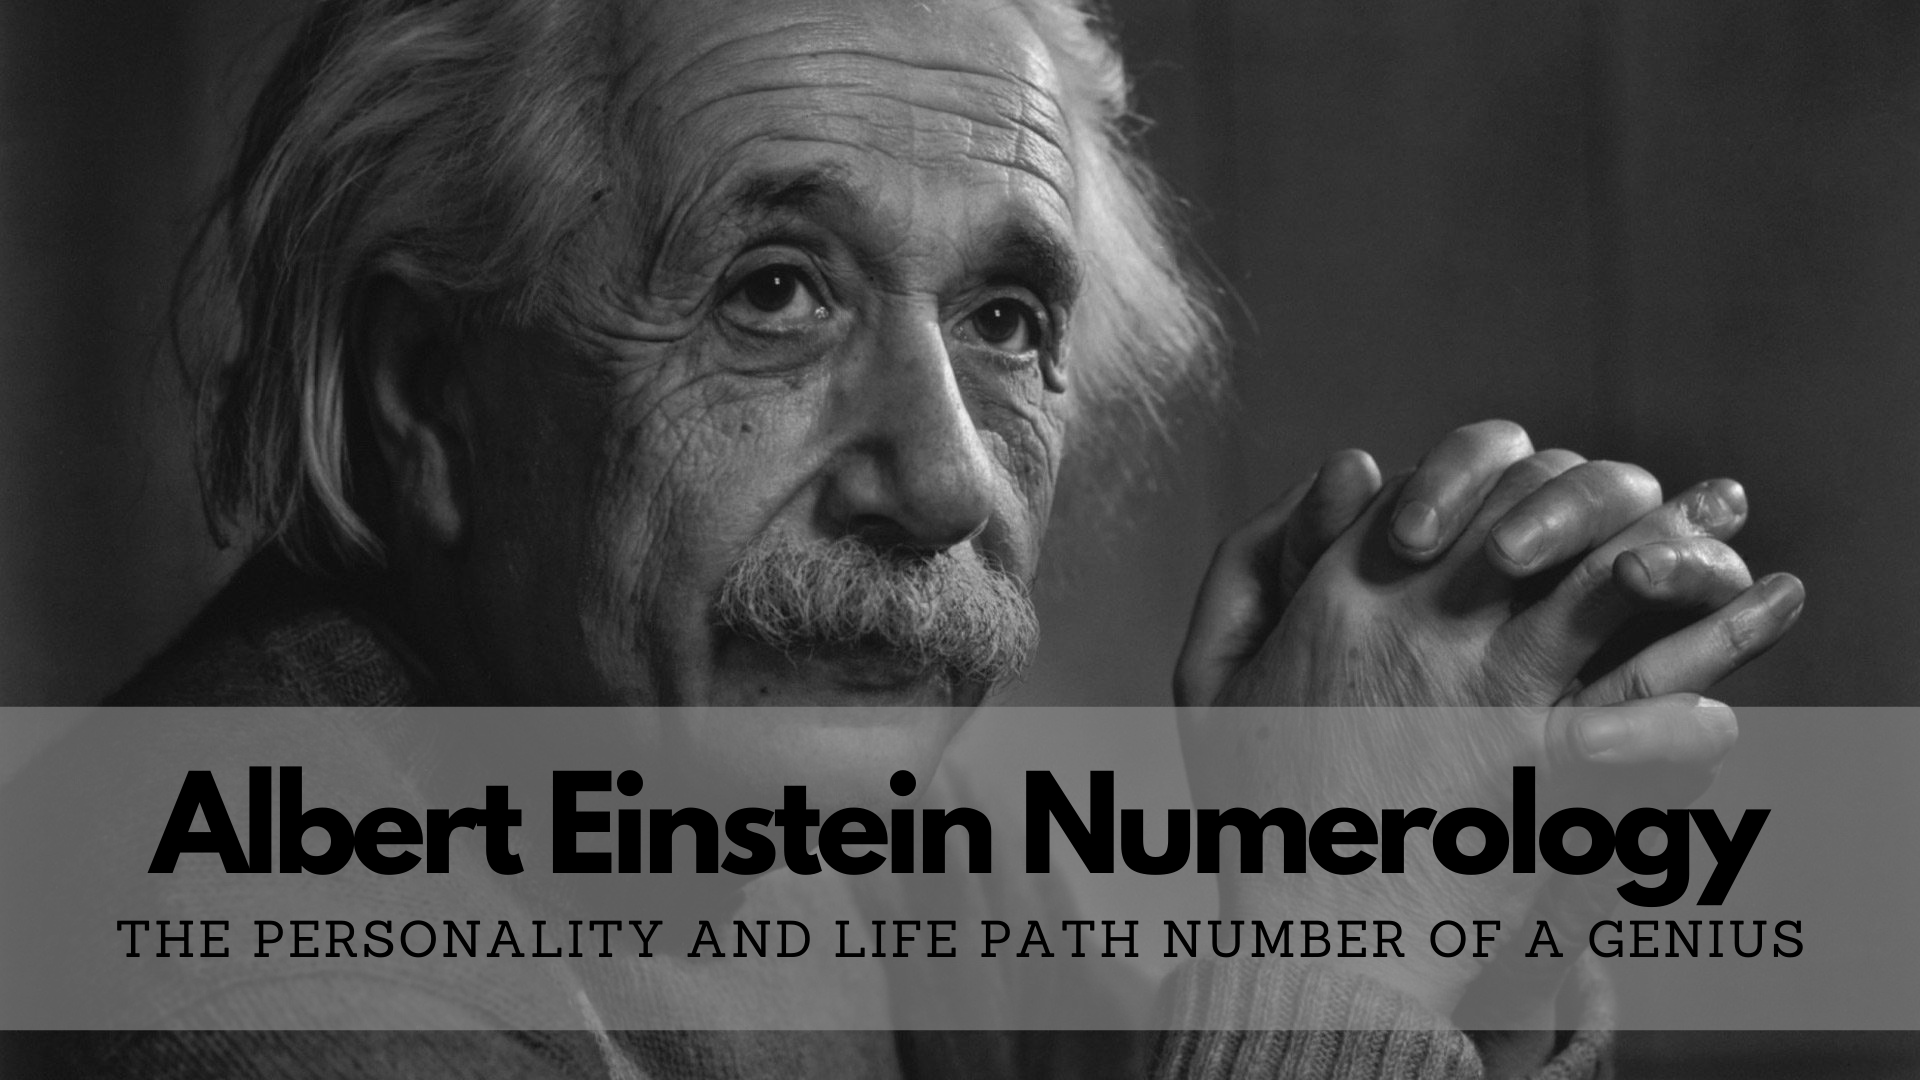 Albert Einstein Numerology - The Personality And Life Path Number Of A Genius